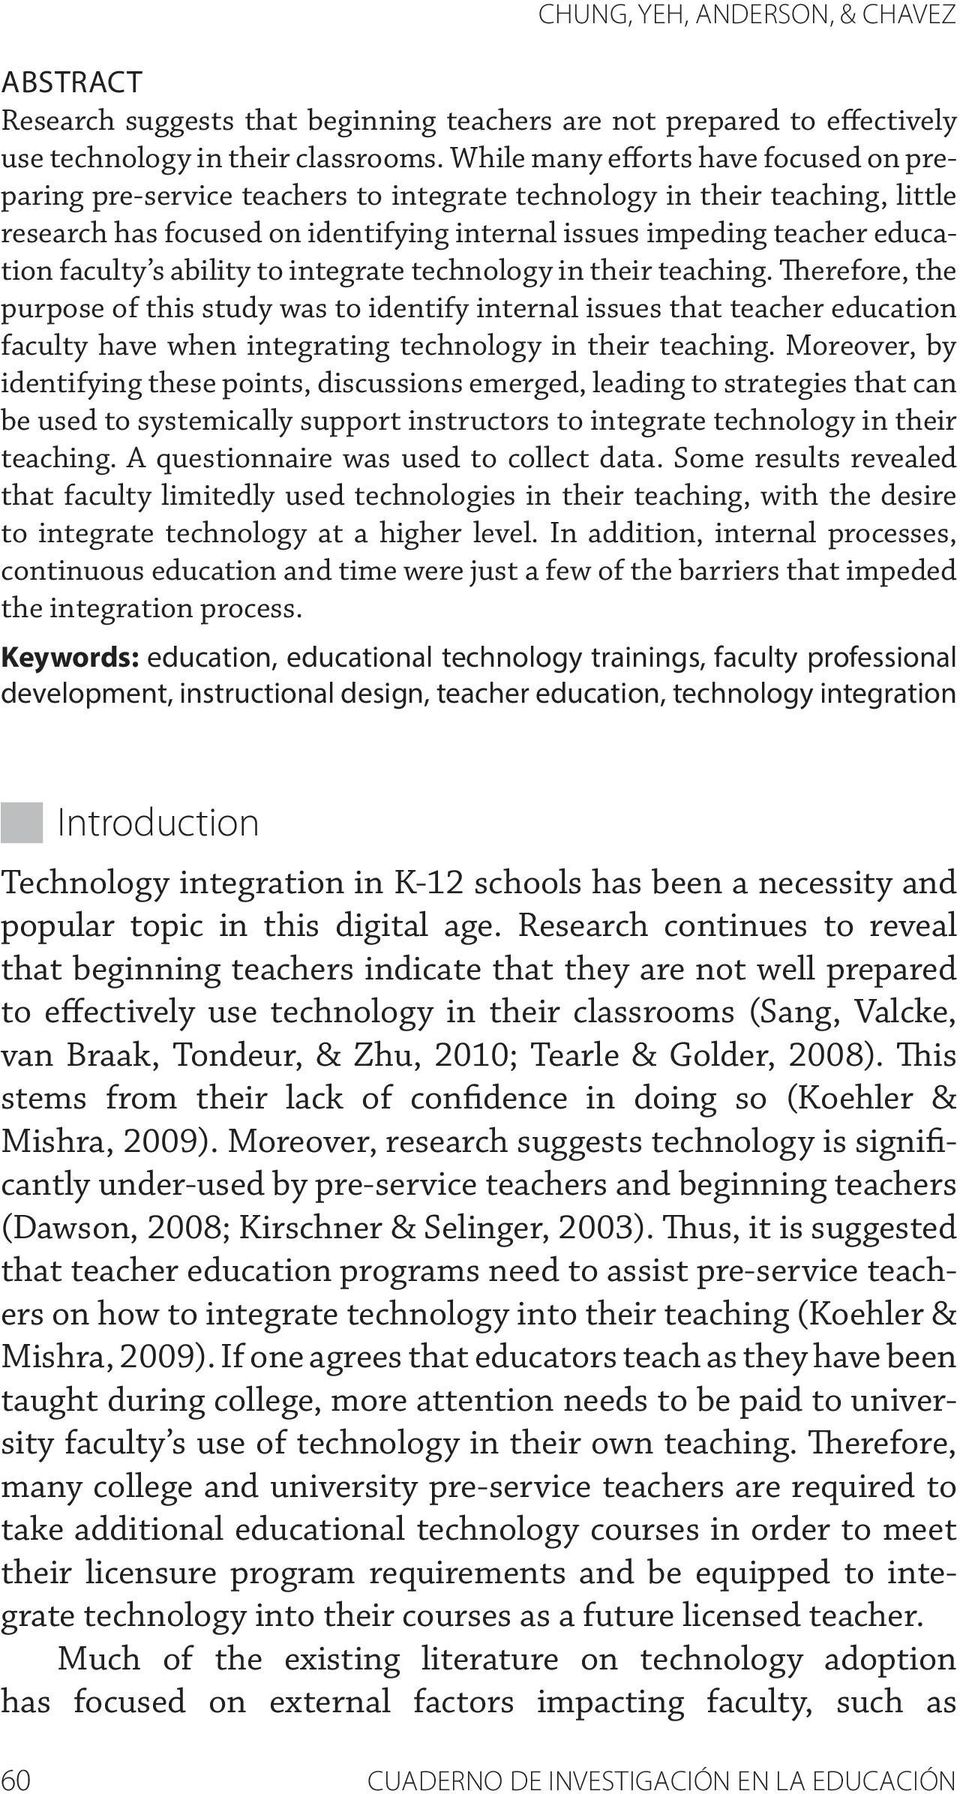 faculty s ability to integrate technology in their teaching.